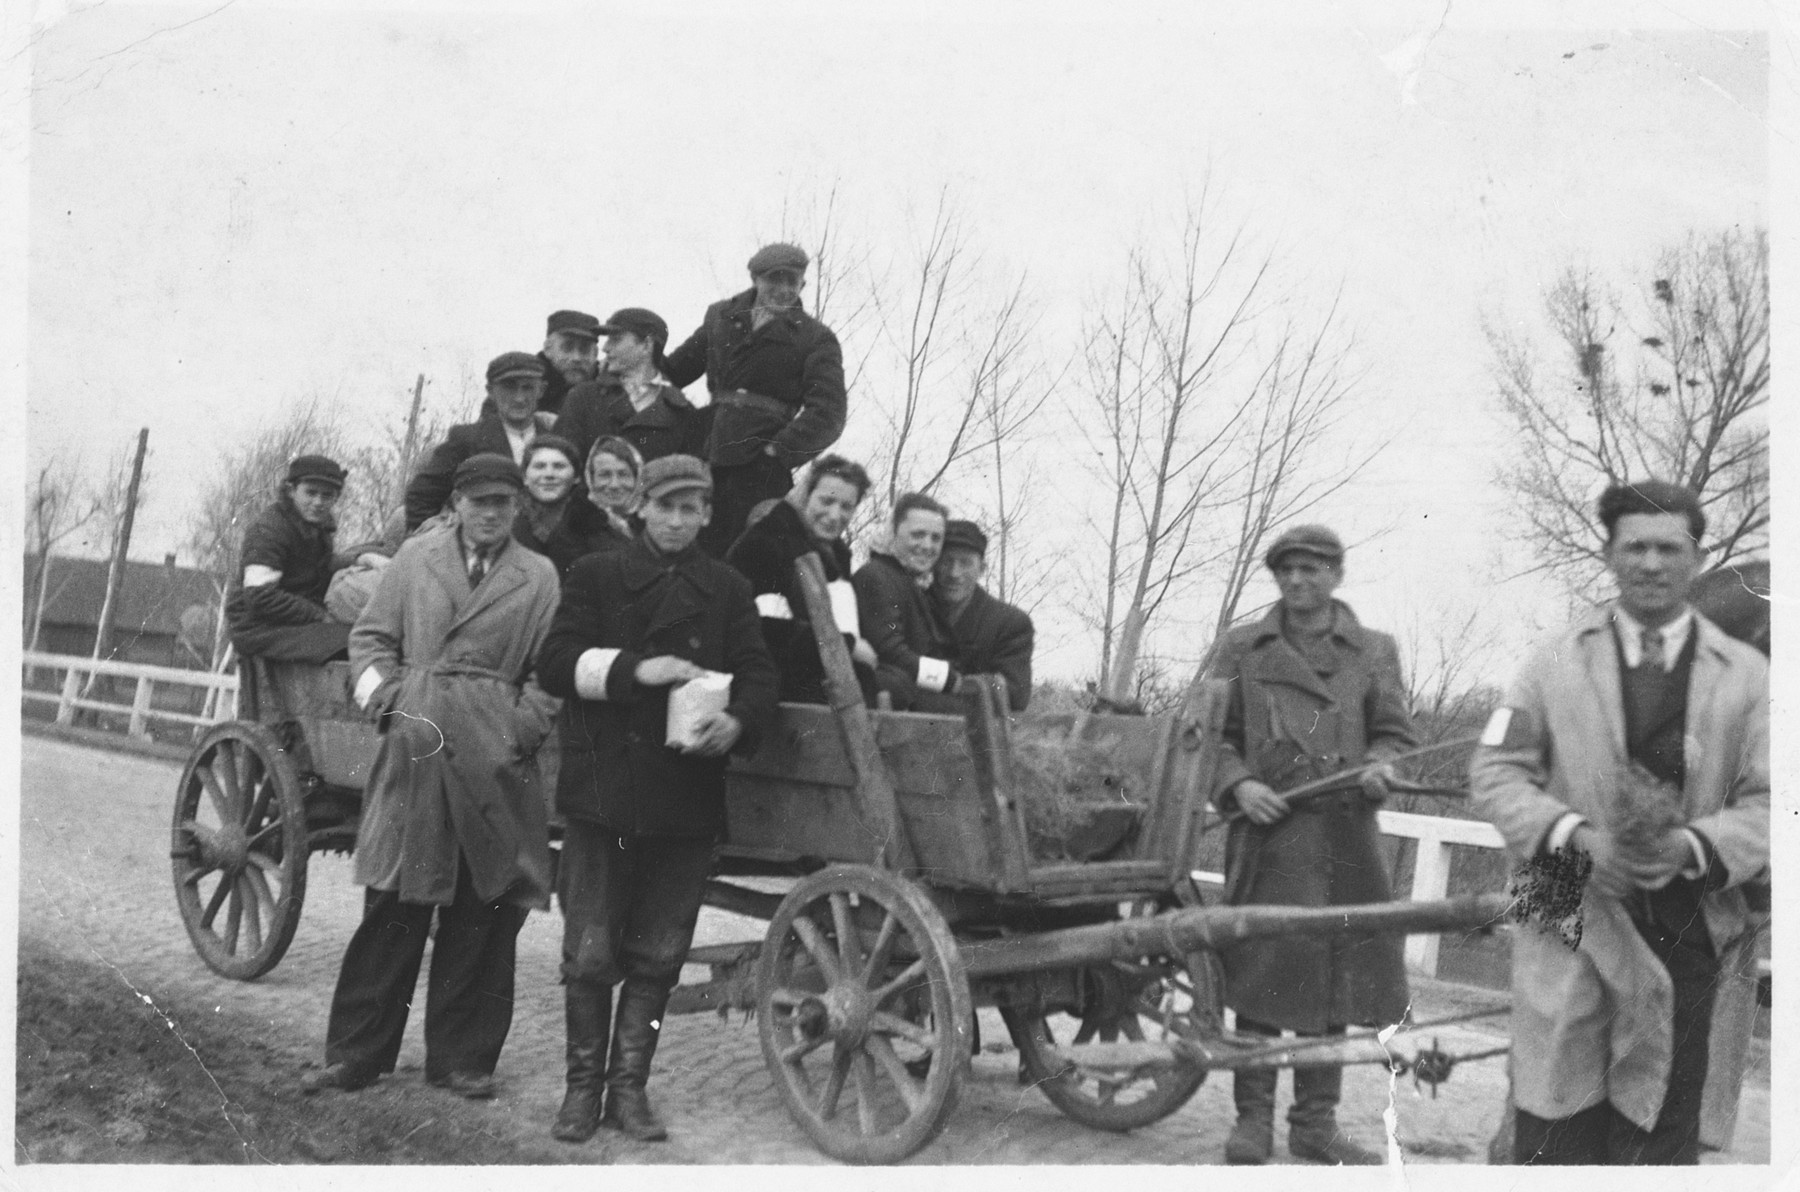 A group of Jewish friends wearing armbands poses on and around a hay wagon near Radom shortly after the German invasion of Poland.